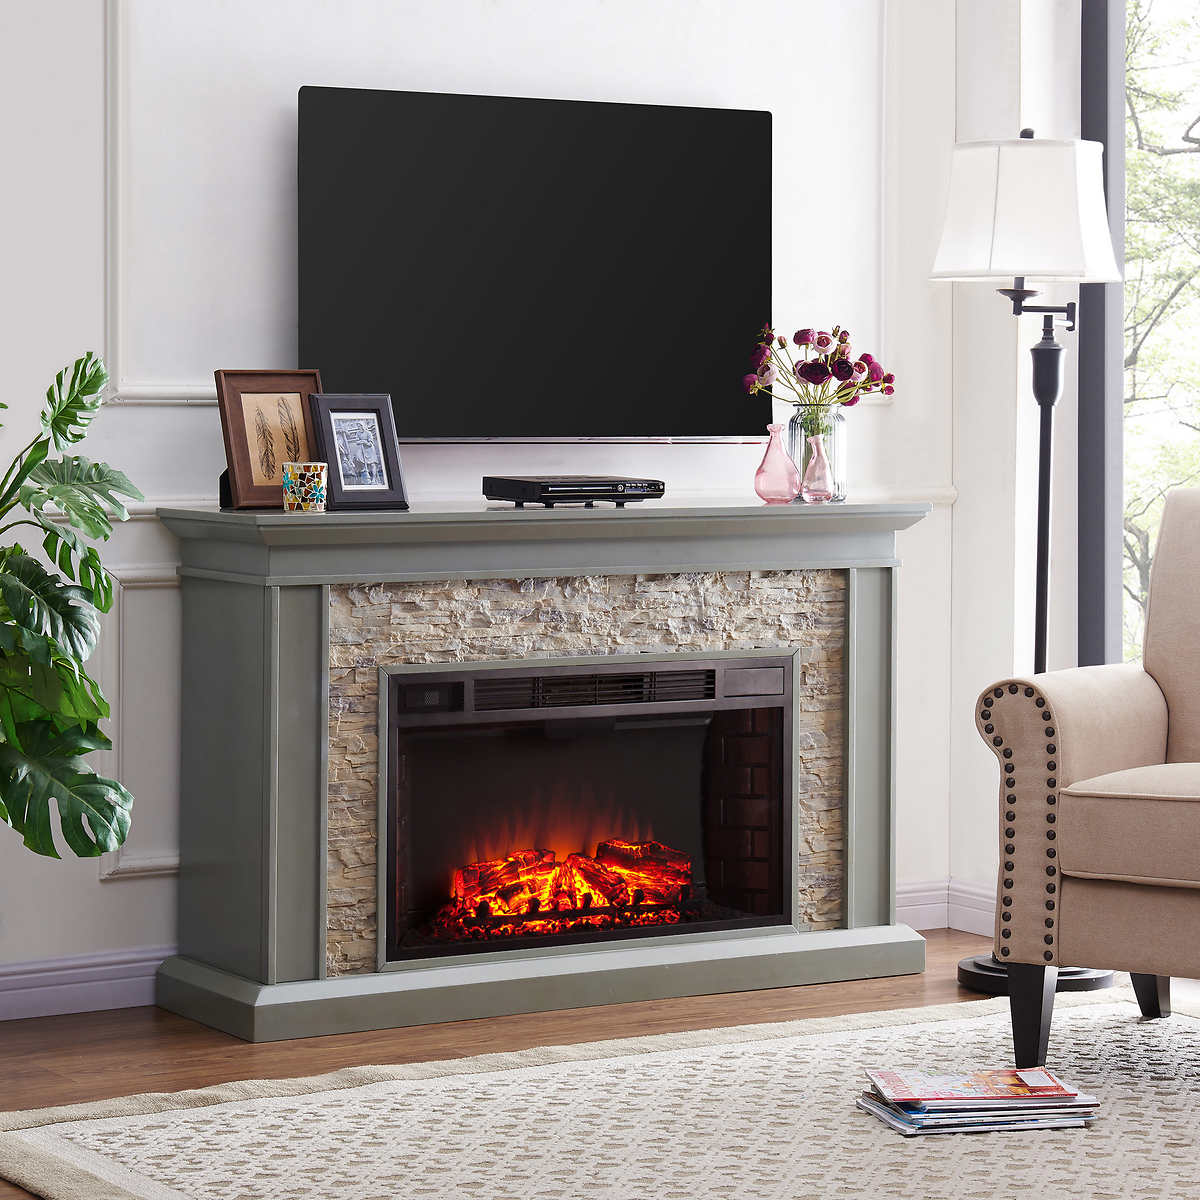 Ledgestone 55 Mantel Led Electric, Can Electric Fireplaces Cause Cancer